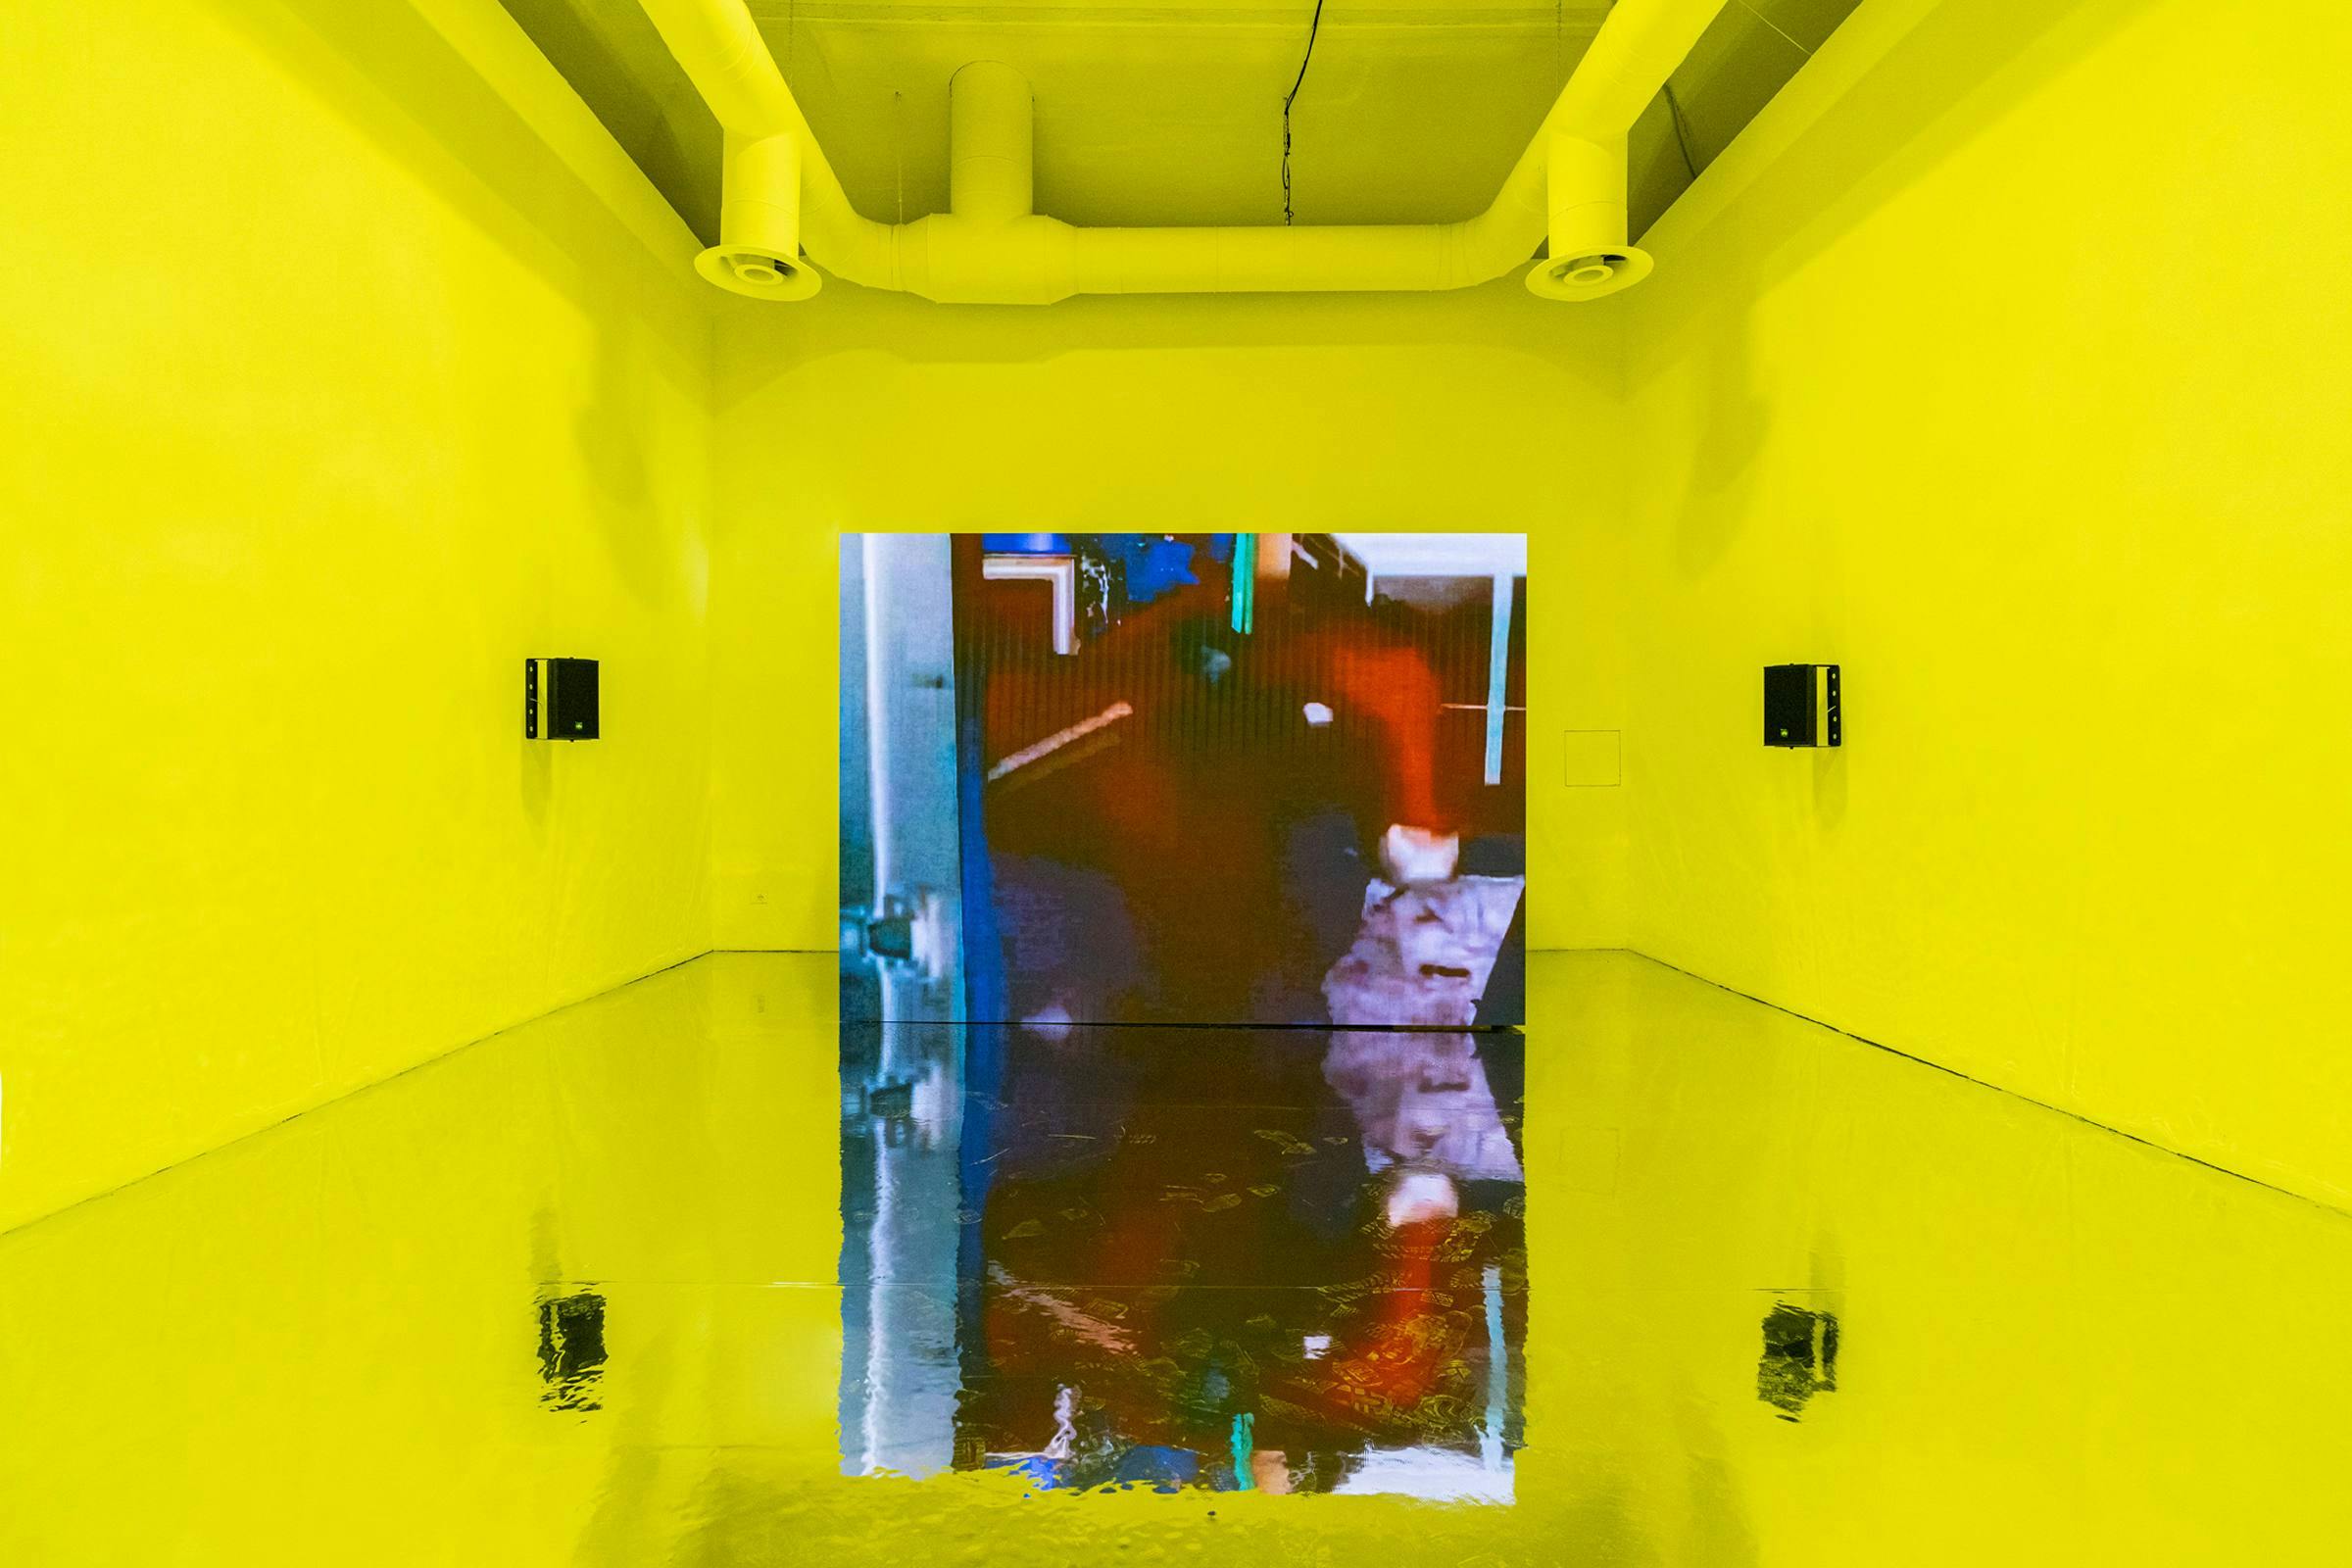 a video artwork installed in an art gallery. The walls are painted yellow and the floor is made from a highly reflective material.